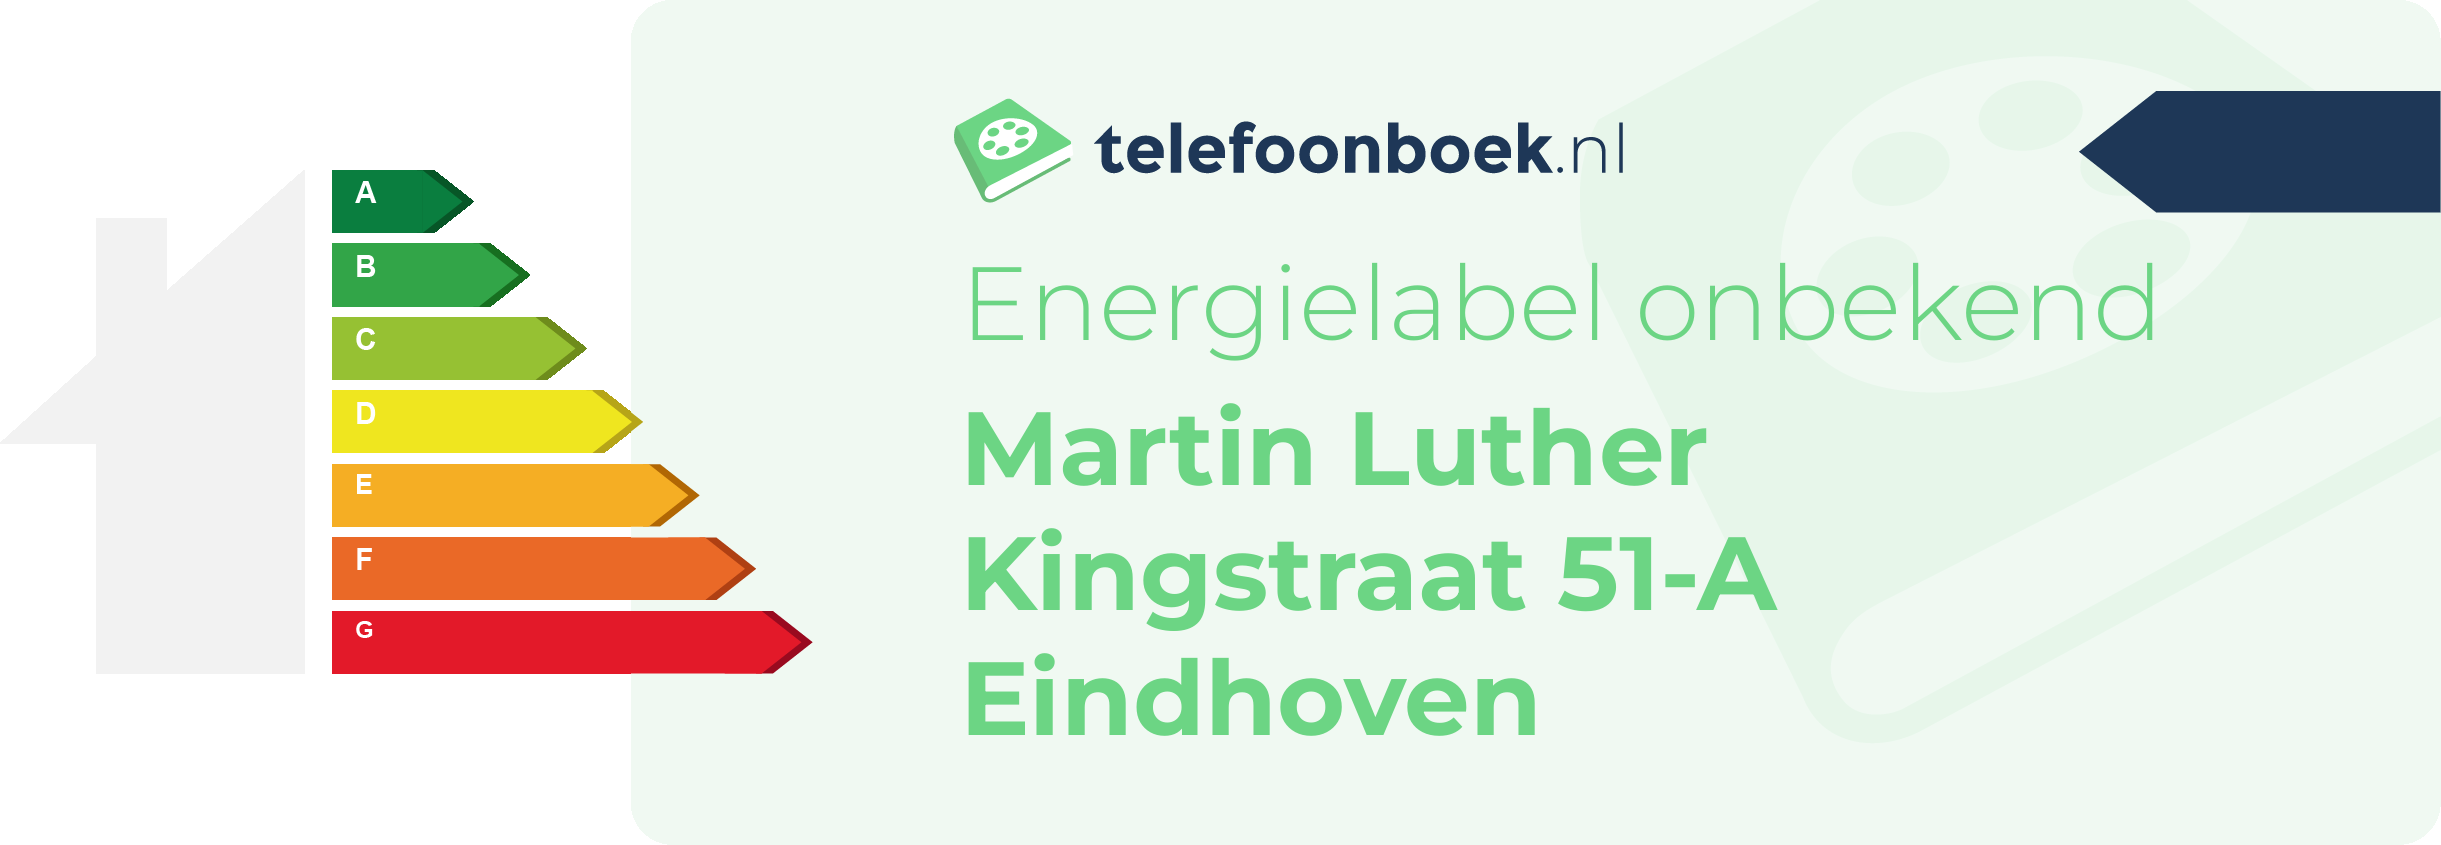 Energielabel Martin Luther Kingstraat 51-A Eindhoven